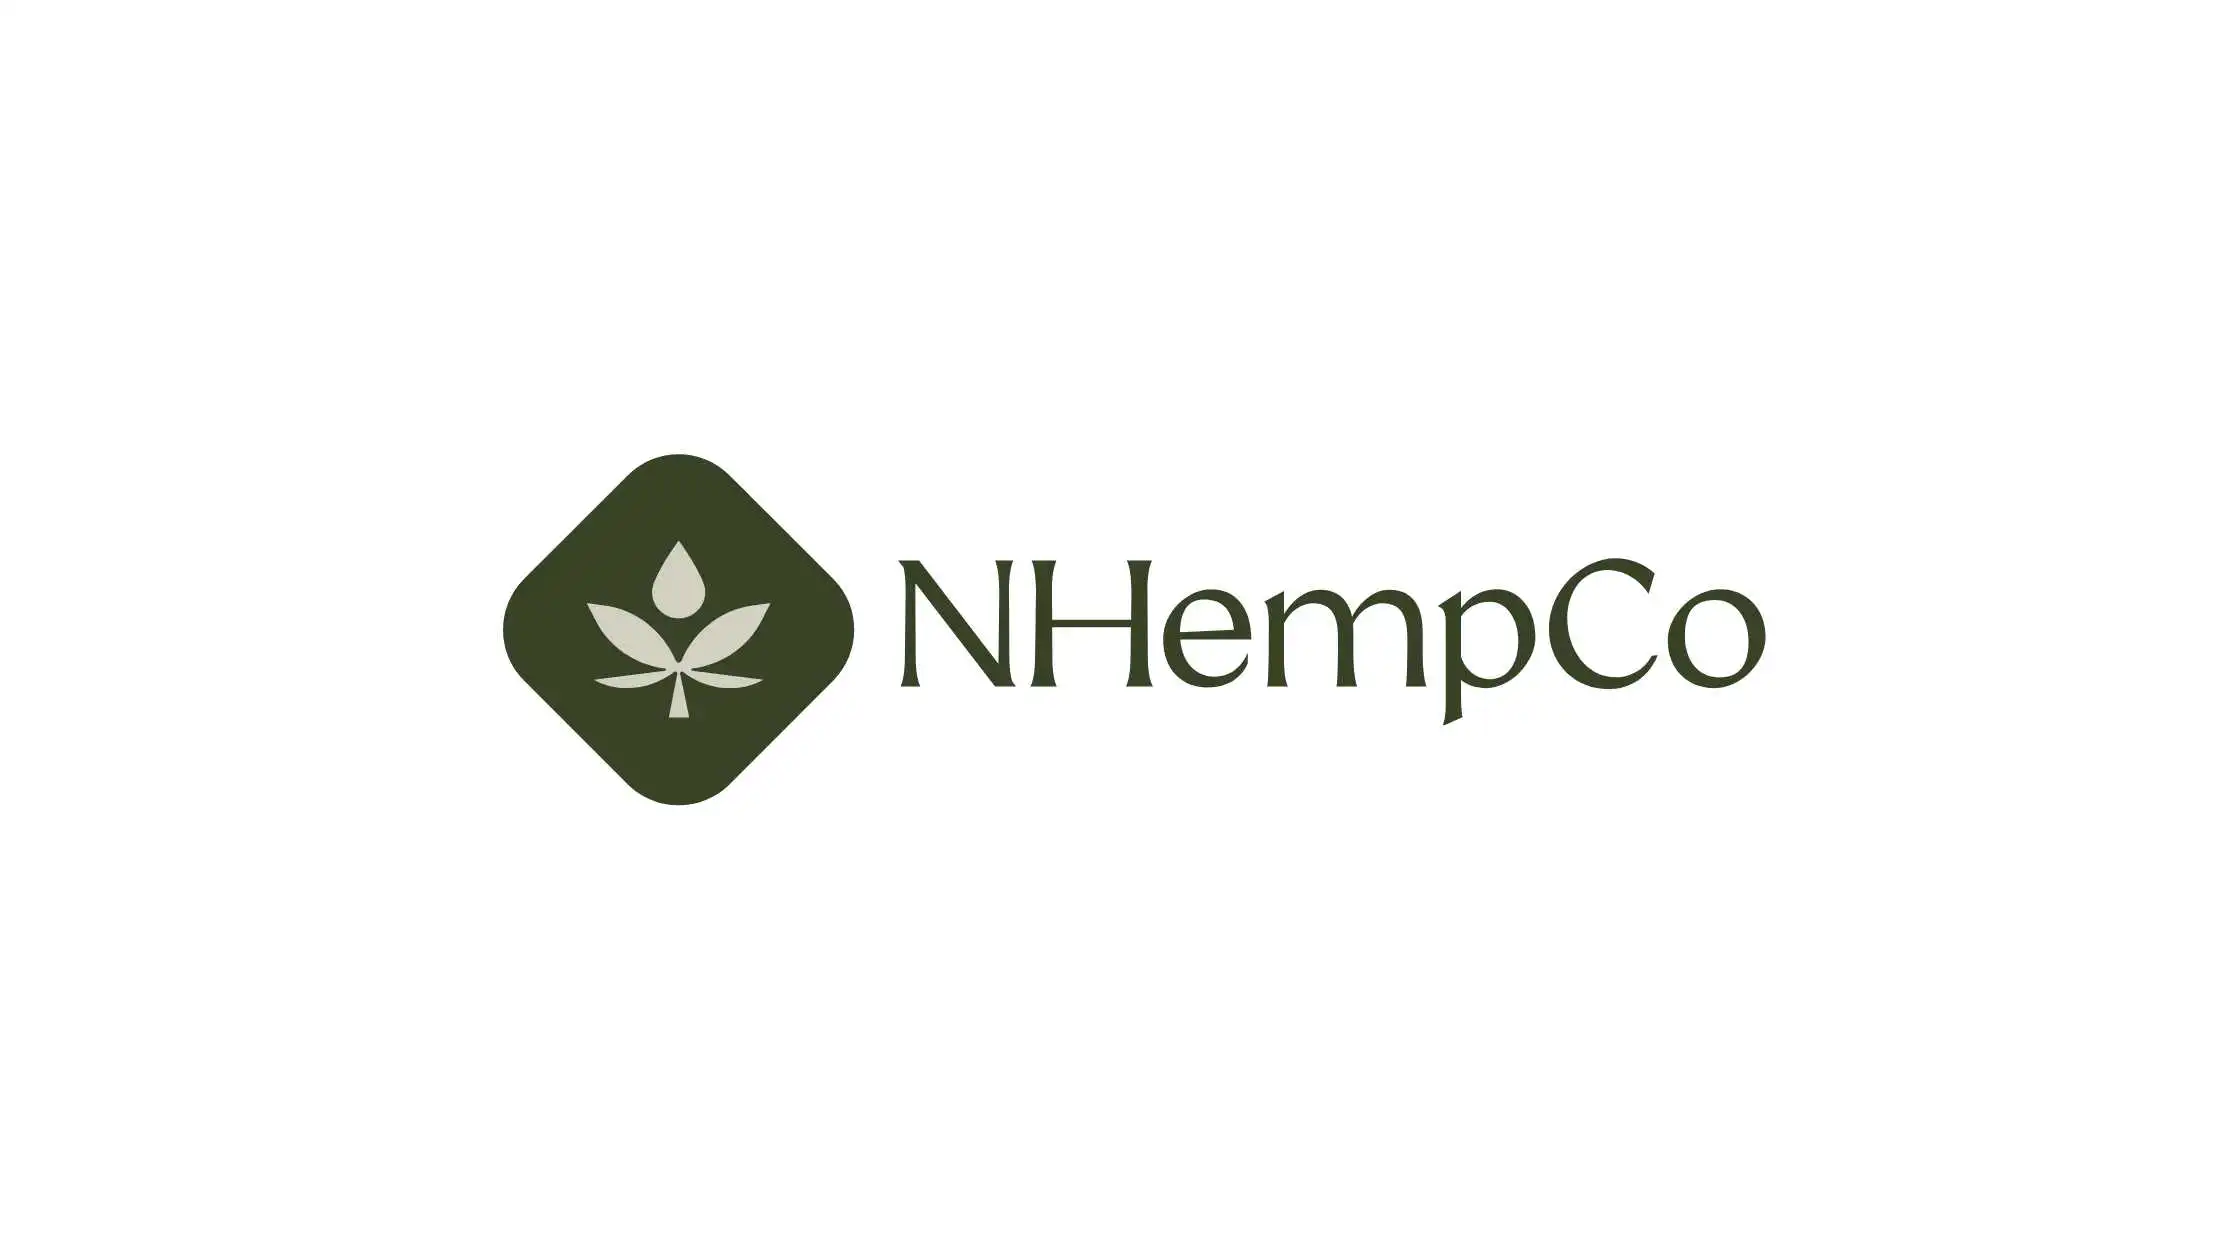 NHempCo plan to Cultivate Industrial, hemp Set up Plants